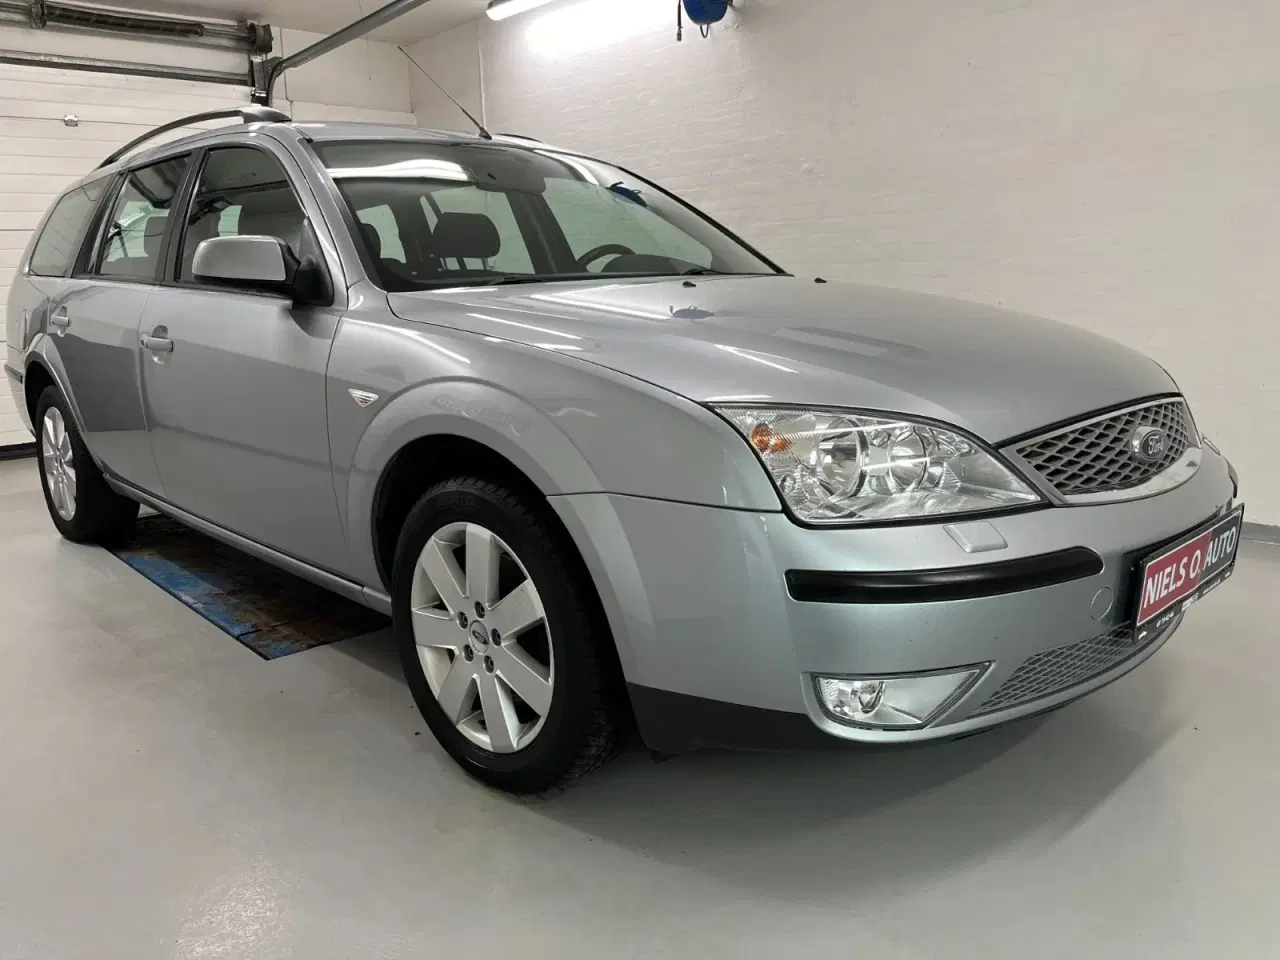 Billede 2 - Ford Mondeo 2,0 145 Trend stc.